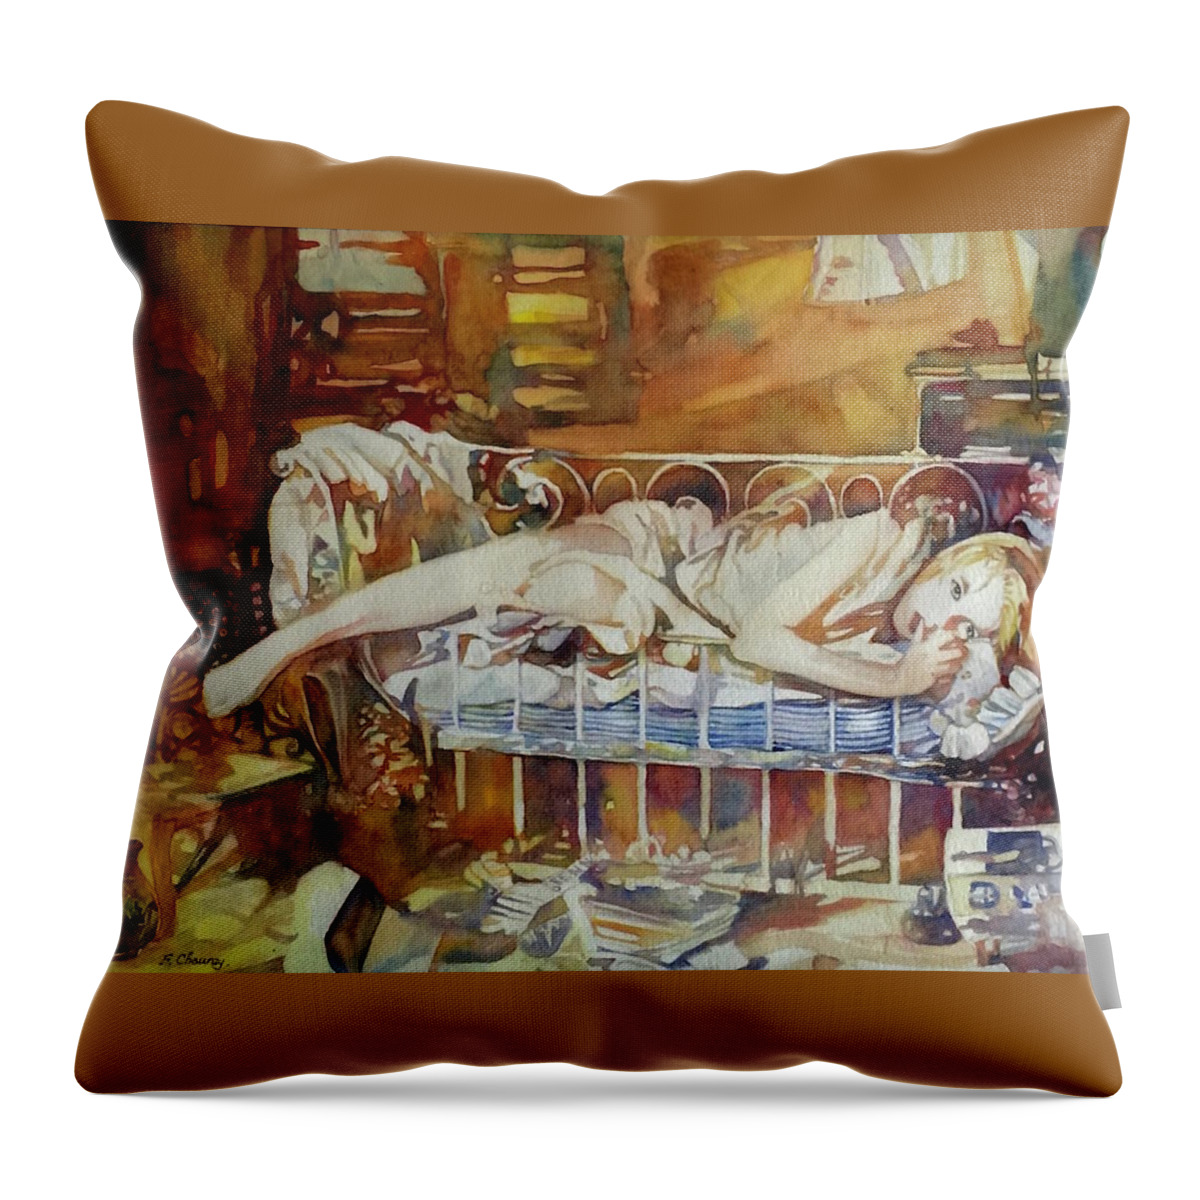 Girl Throw Pillow featuring the painting Baby Doll by Francoise Chauray